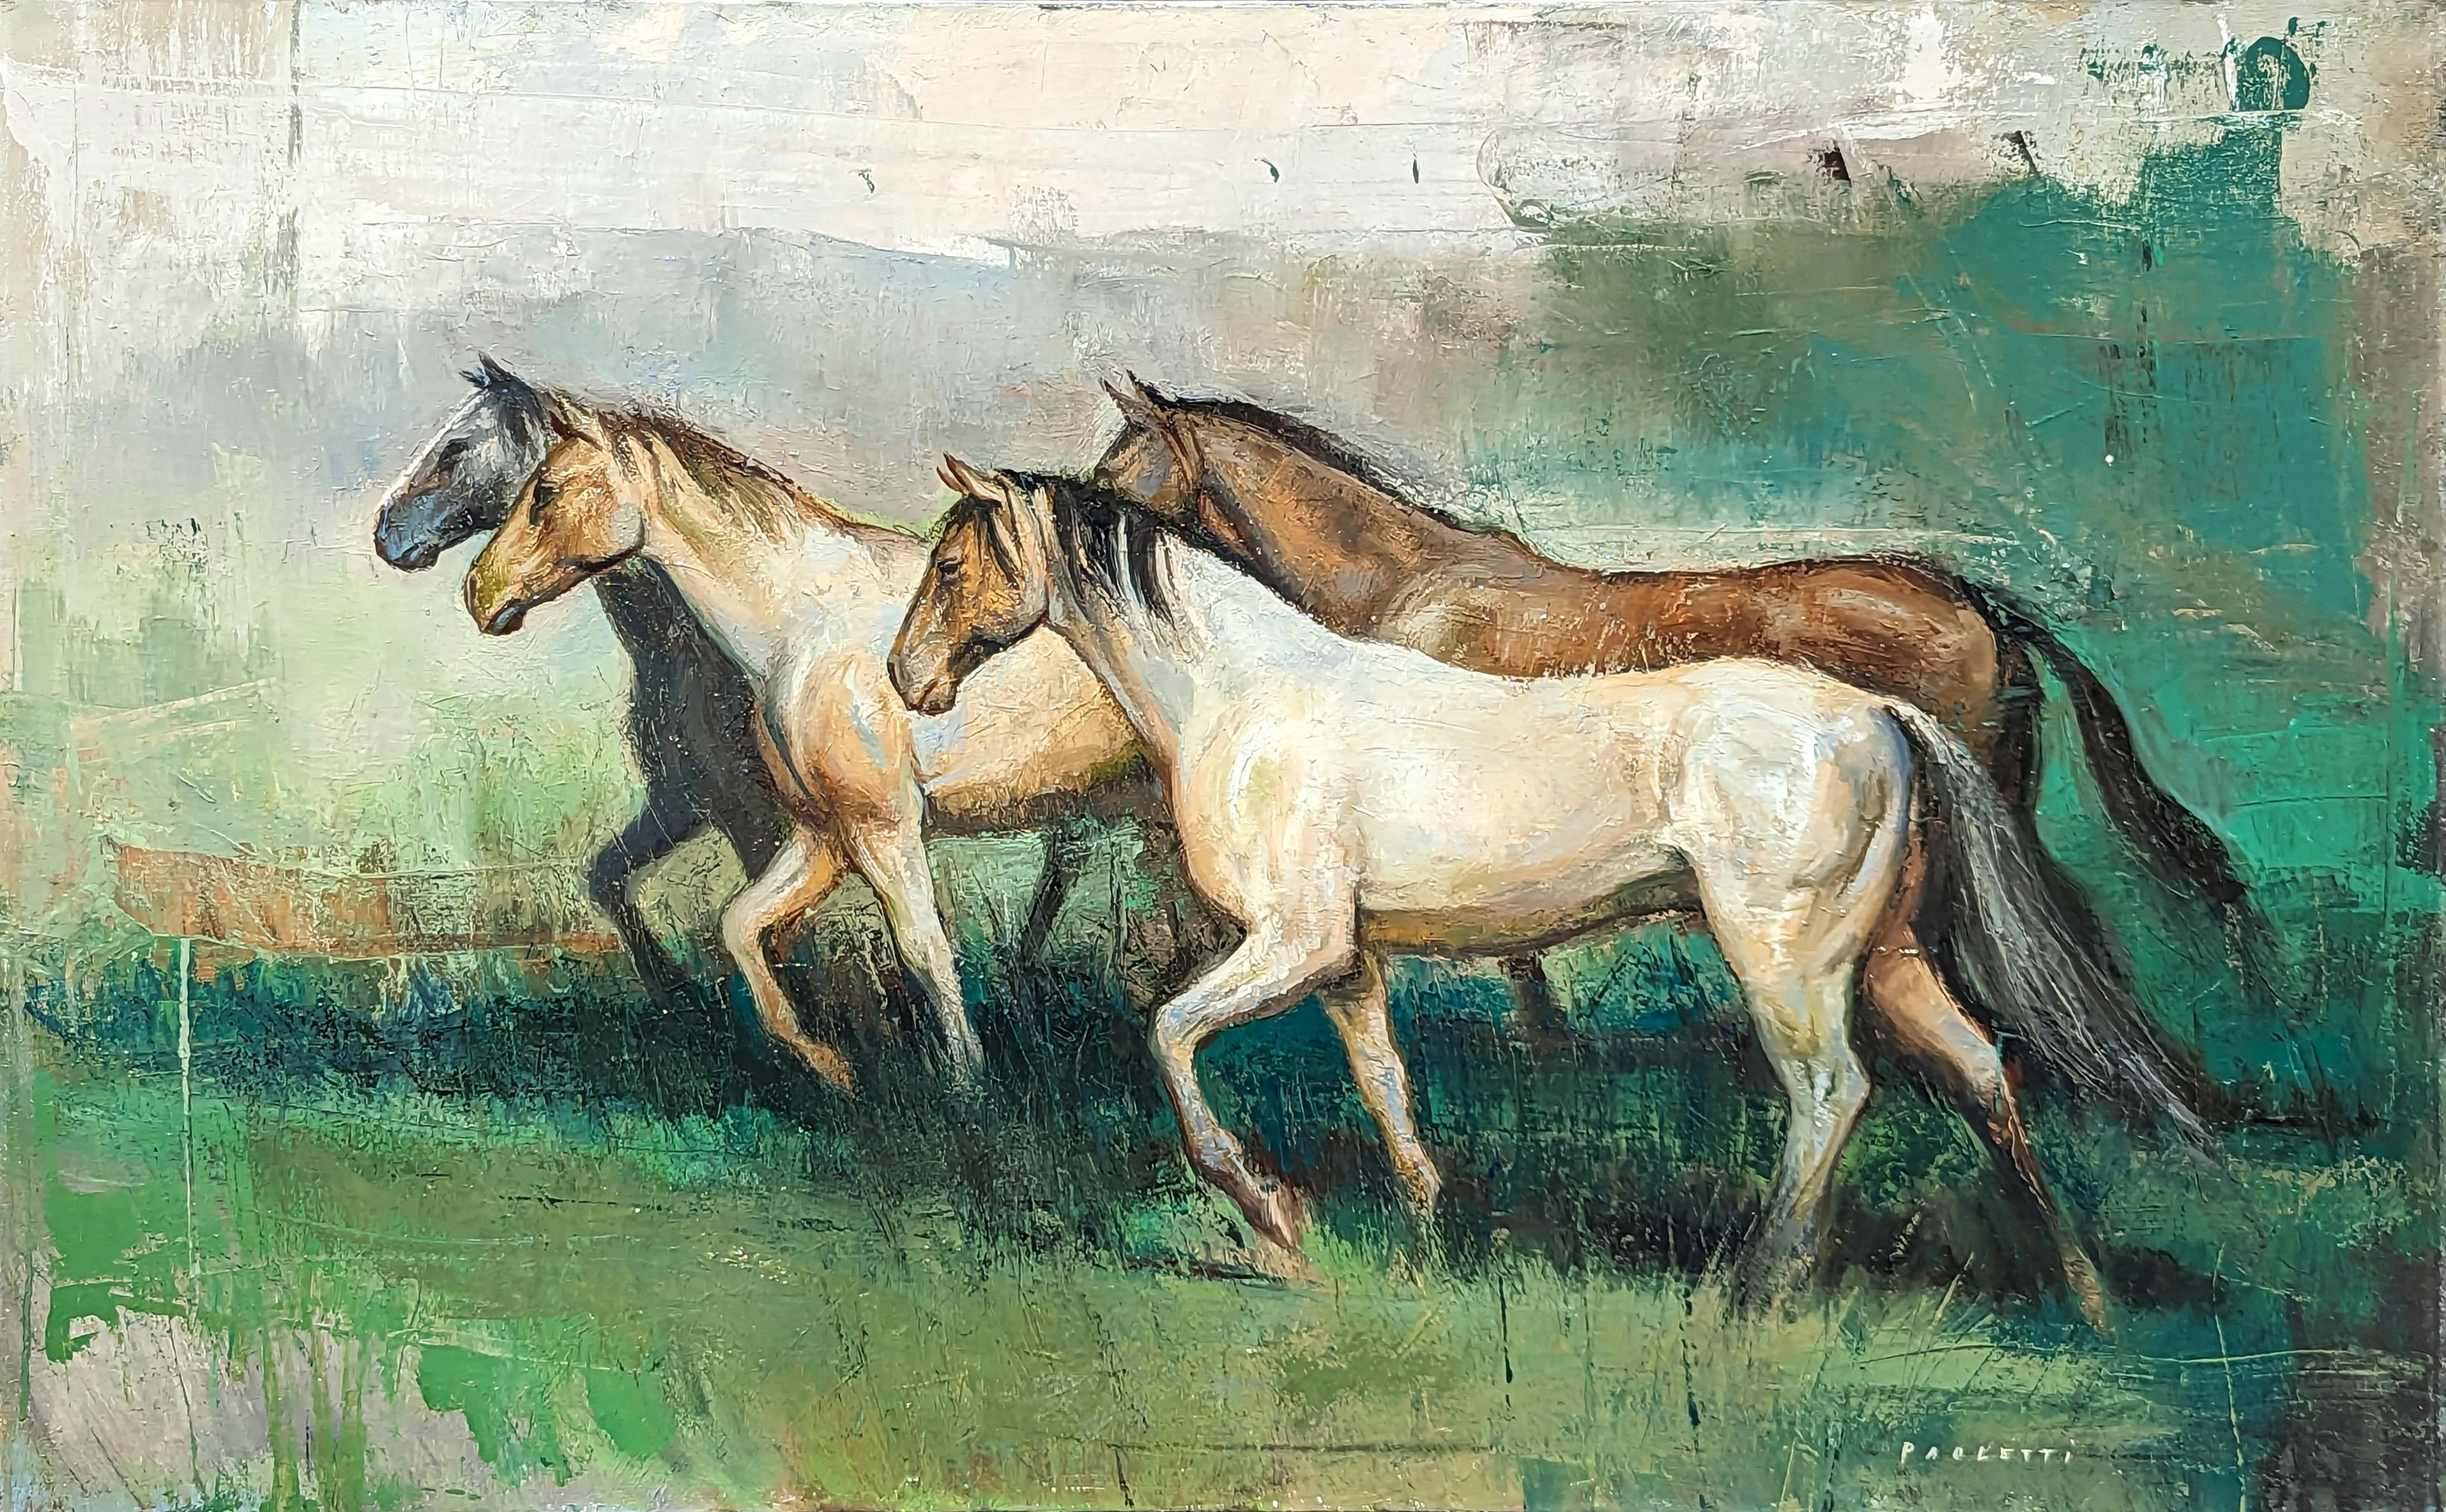 Matthew Paoletti Abstract Painting - "Four Horses" Contemporary Naturalistic Equestrian Animal Painting of Horses 